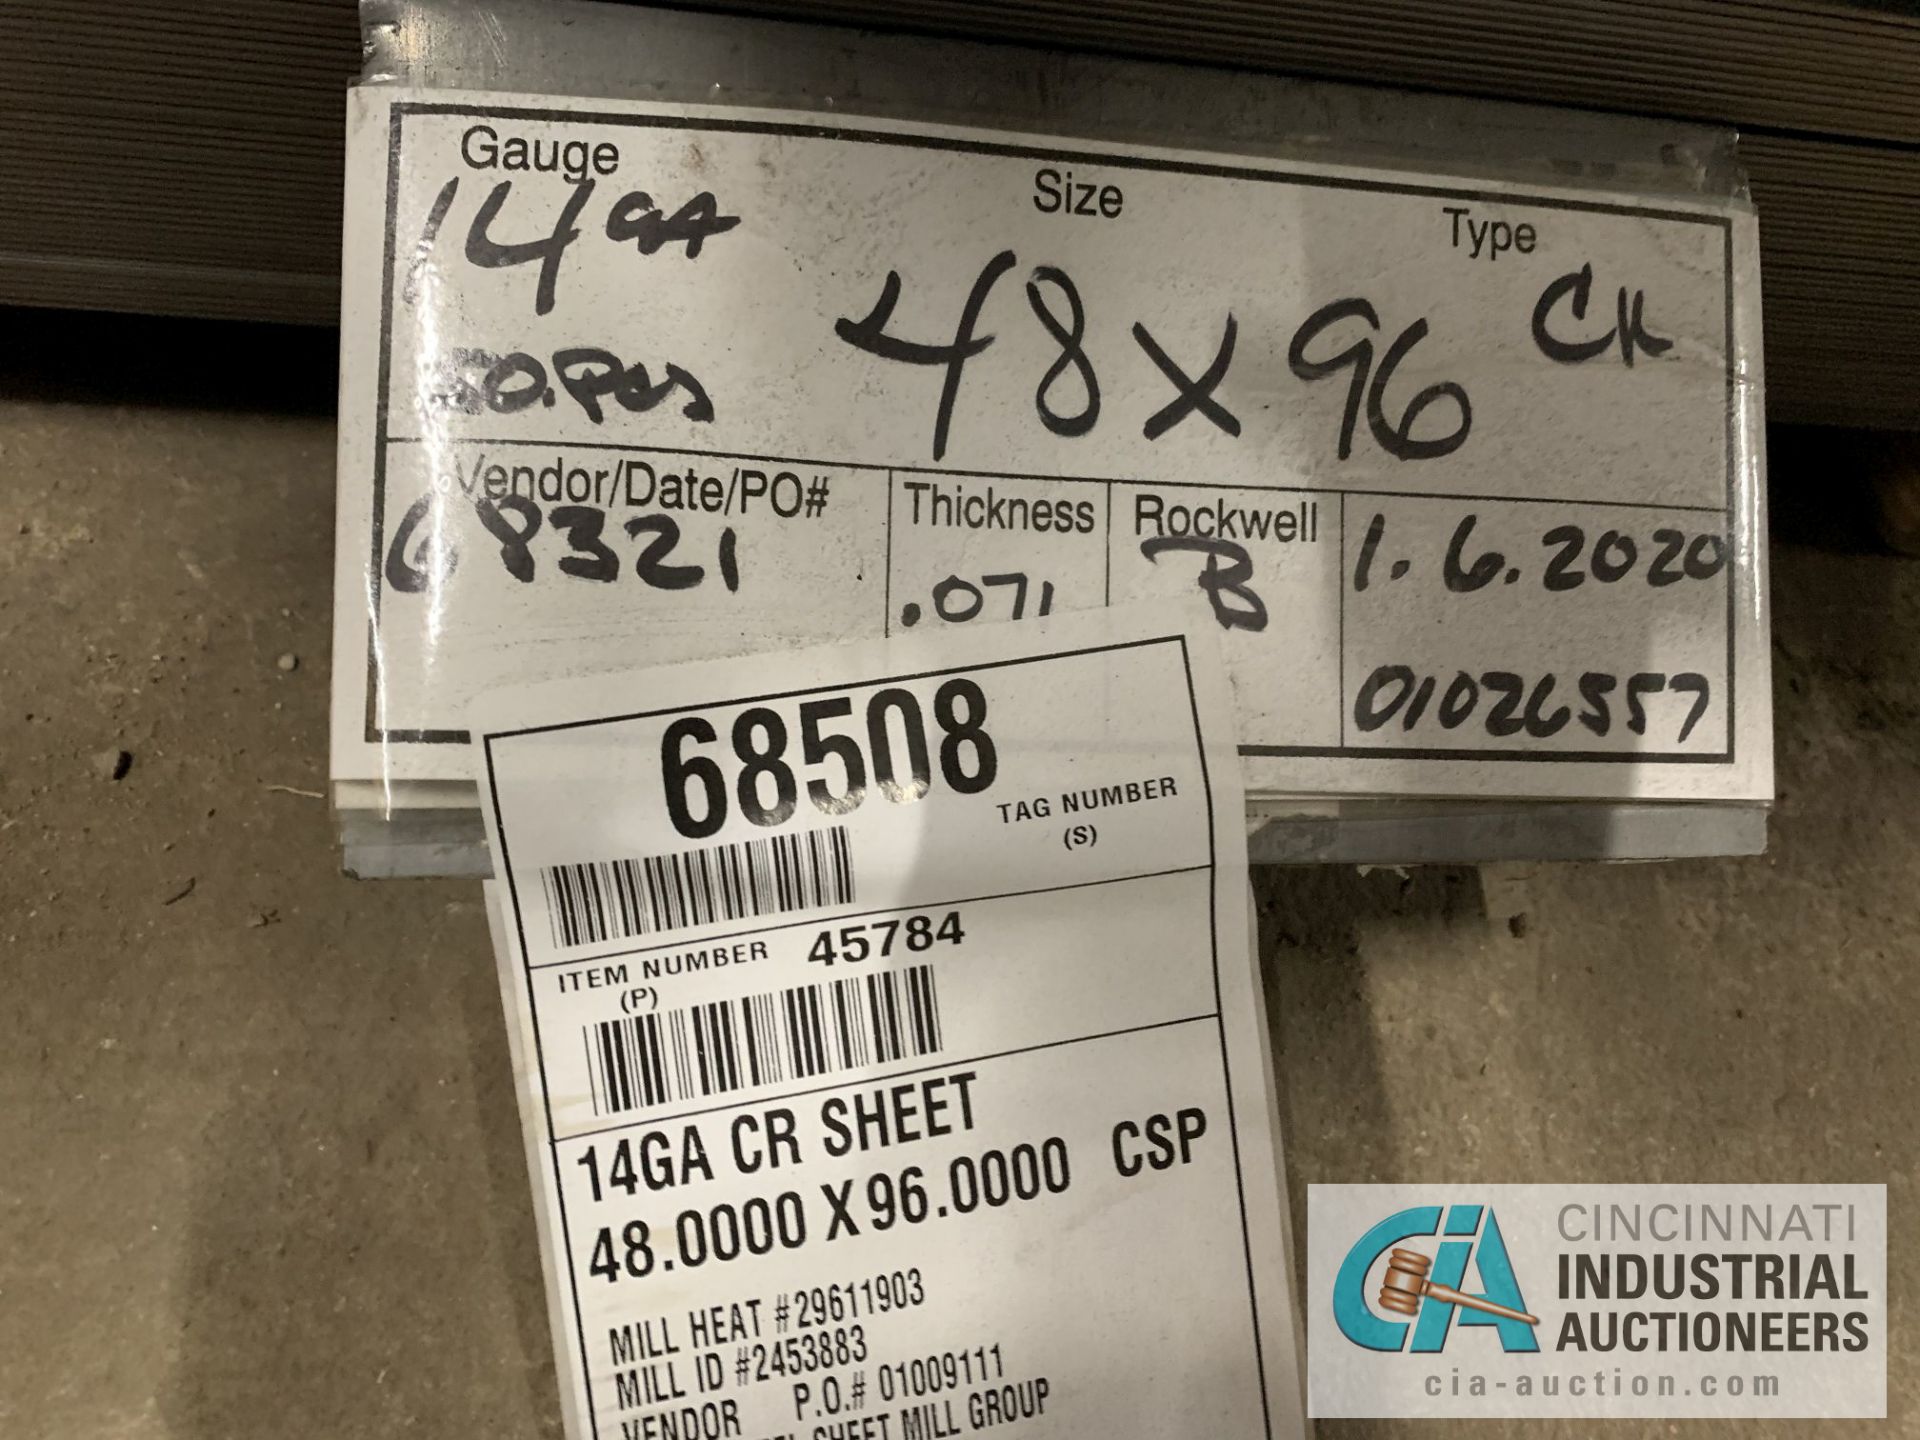 (LOT) APPROX. 32,500 LBS. UNCOATED SHEET STEEL, 1-STACK, 8-BUNDLES, SEE INVENTORY FOR LISTING. - Image 9 of 9